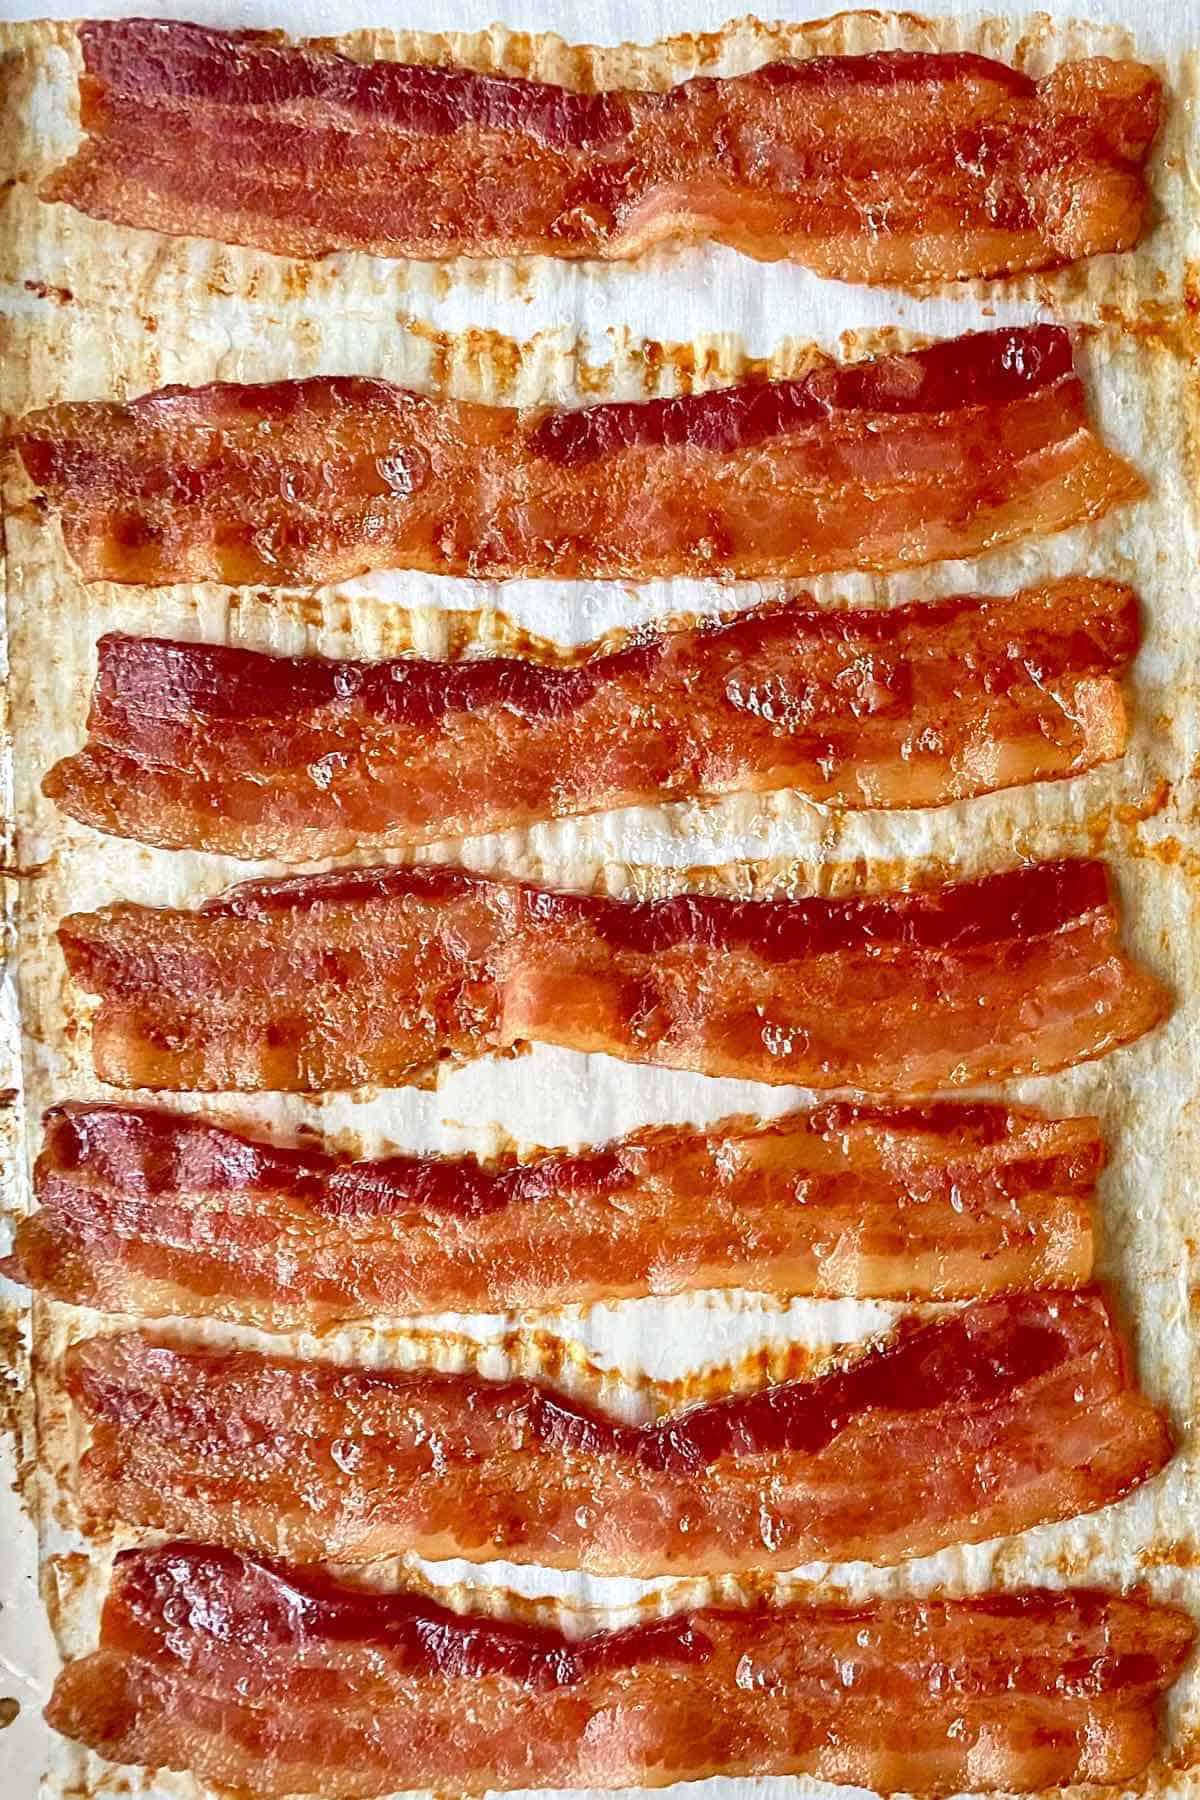 Seven strips of golden brown bacon cooked on an oven baking rack.